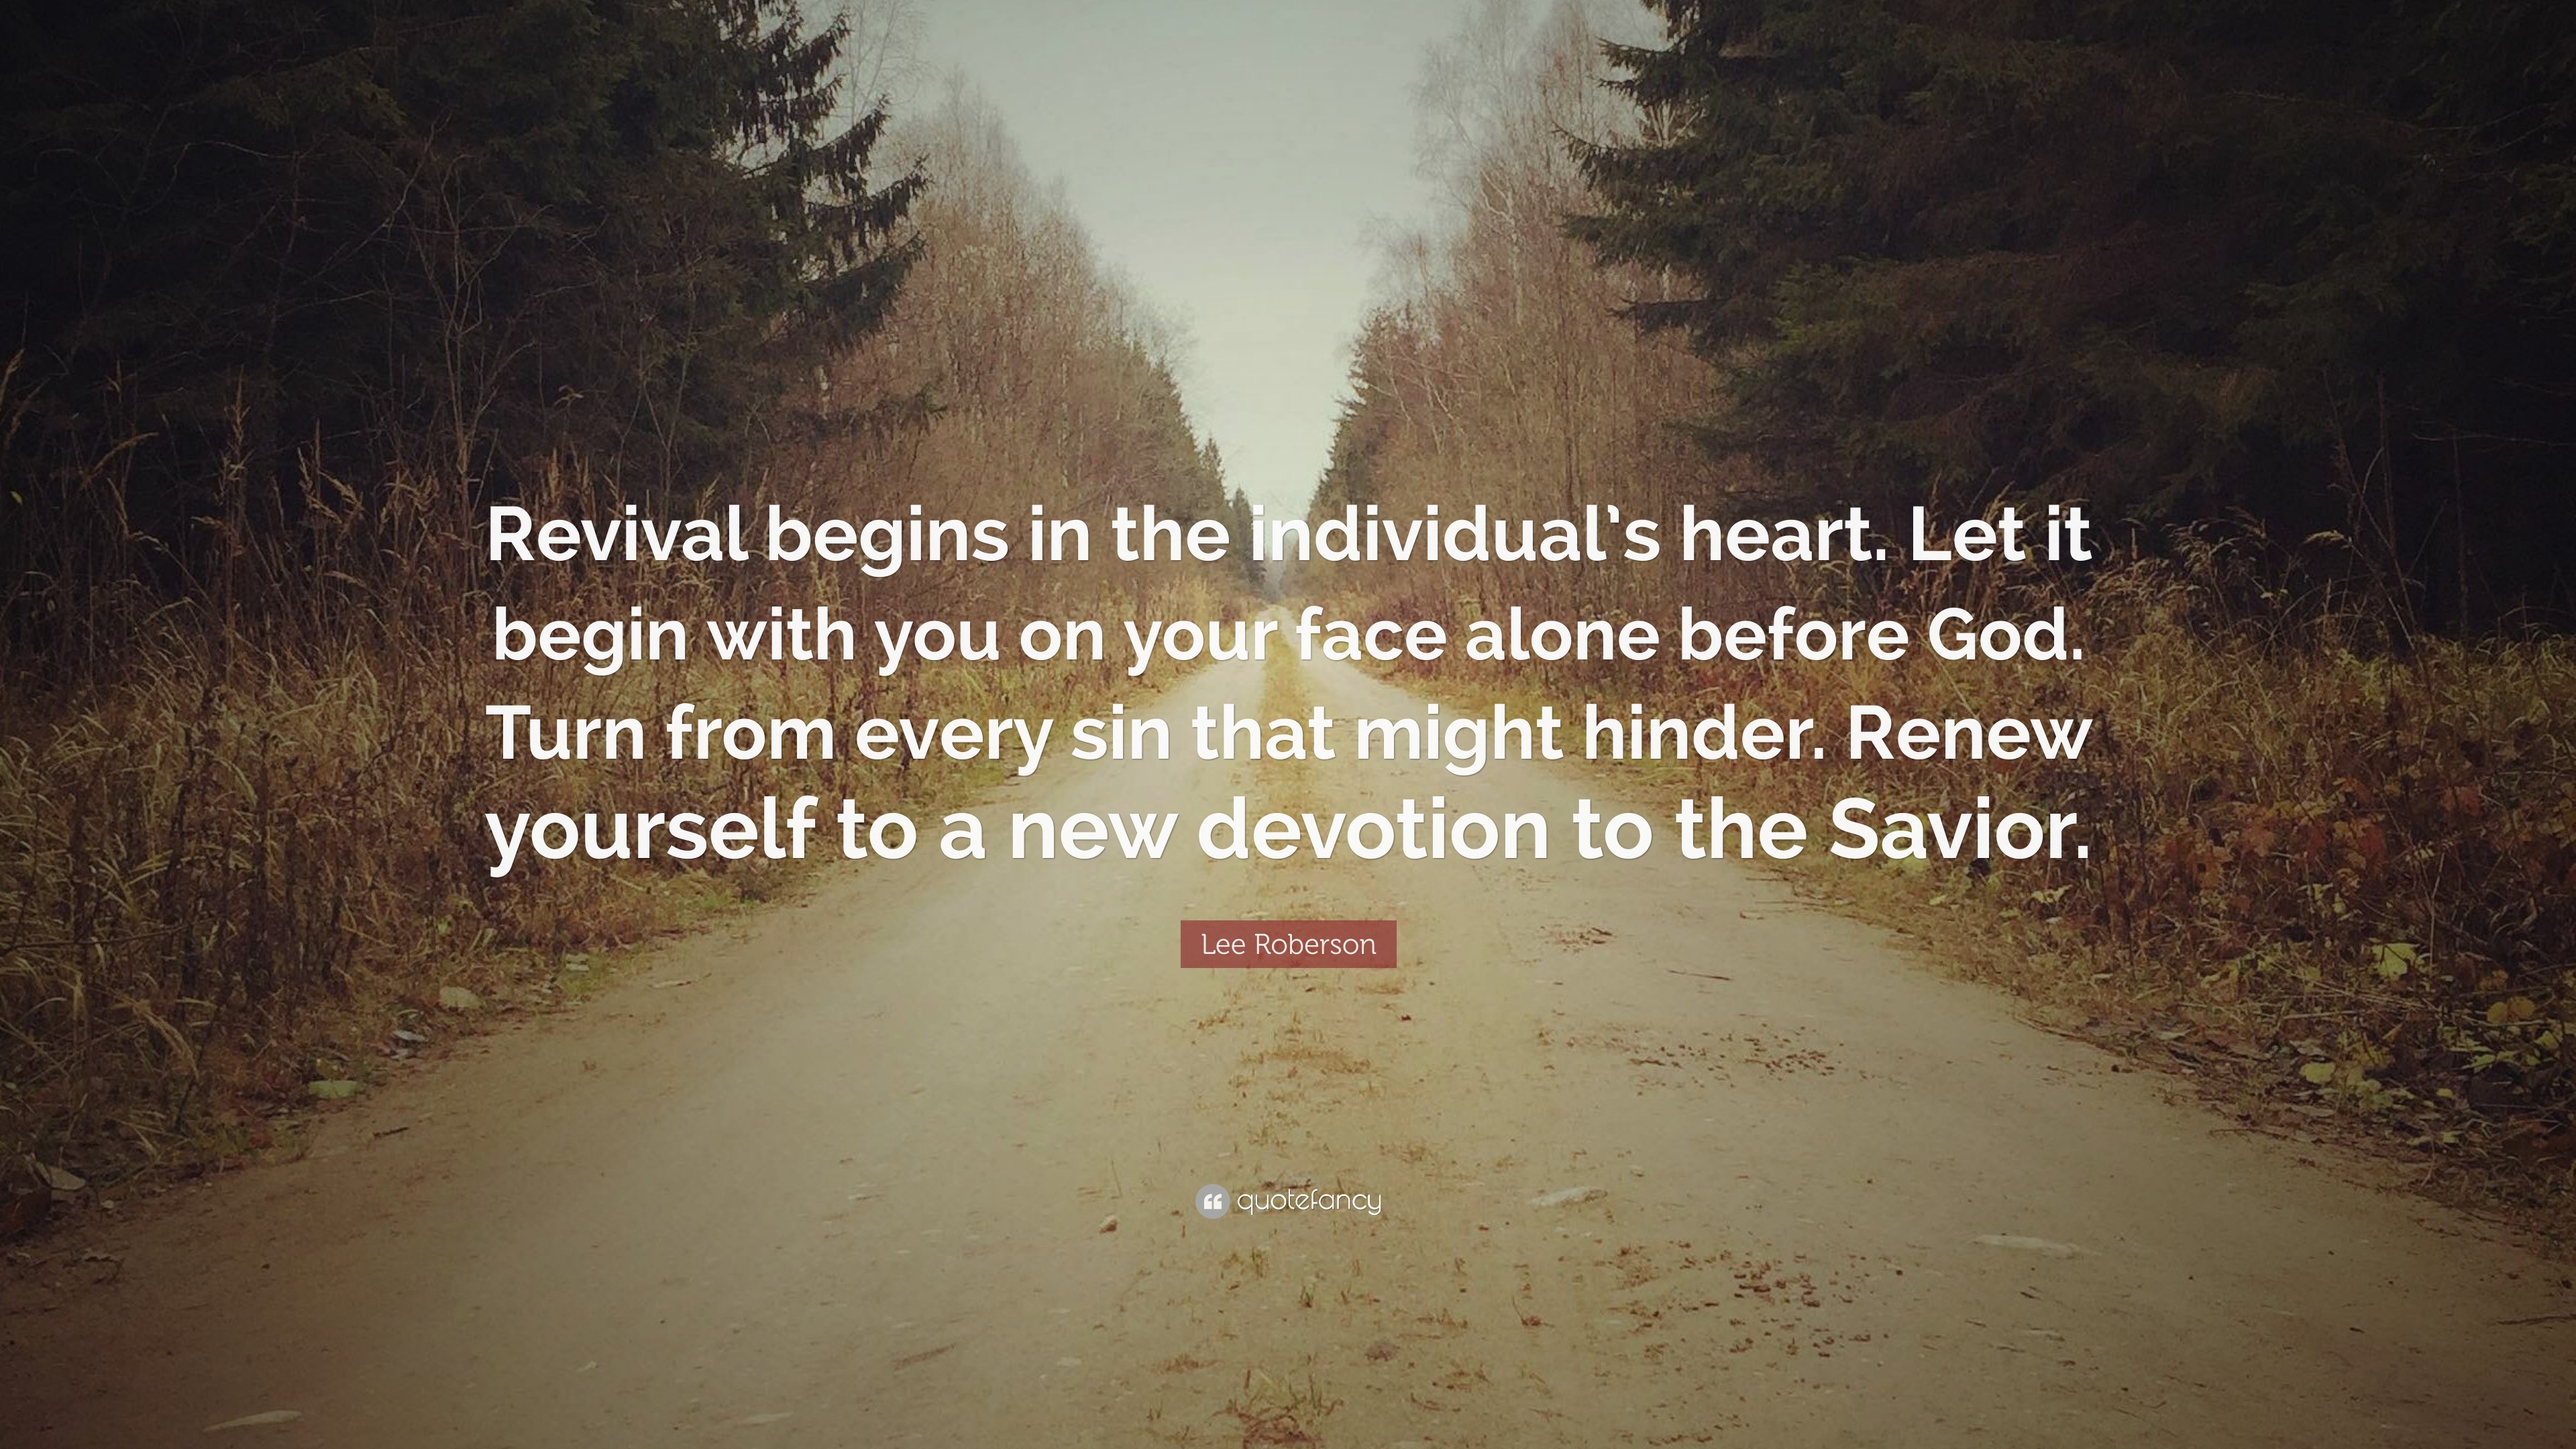 Lee Roberson Quote “Revival begins in the individual’s heart. Let it